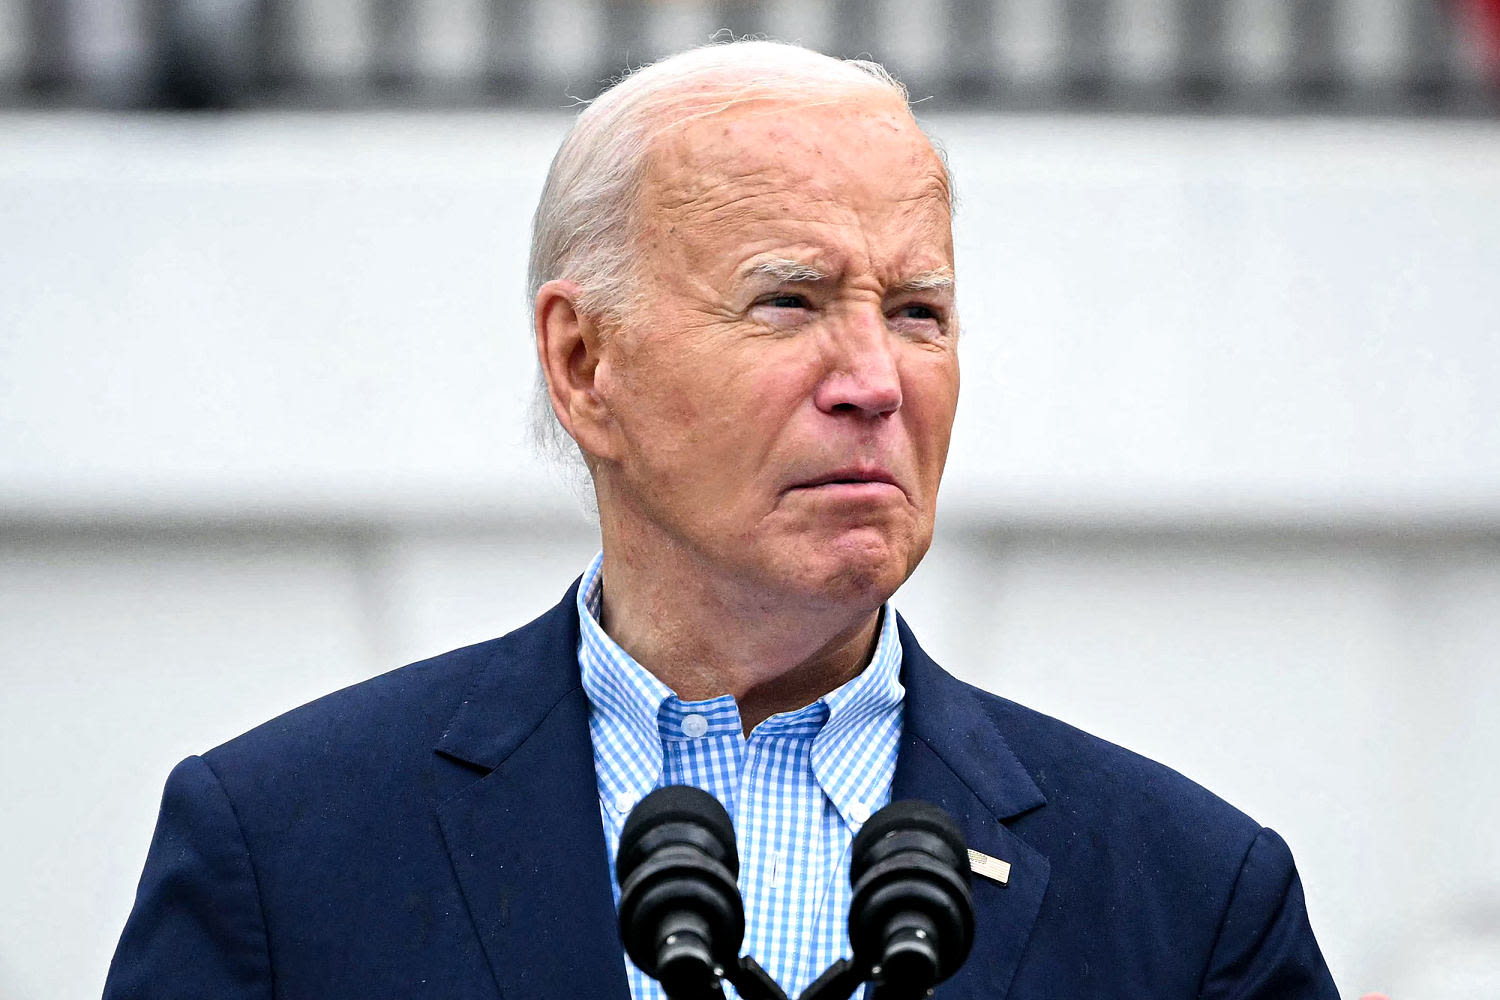 A running list of top Democrats calling for Biden to drop out